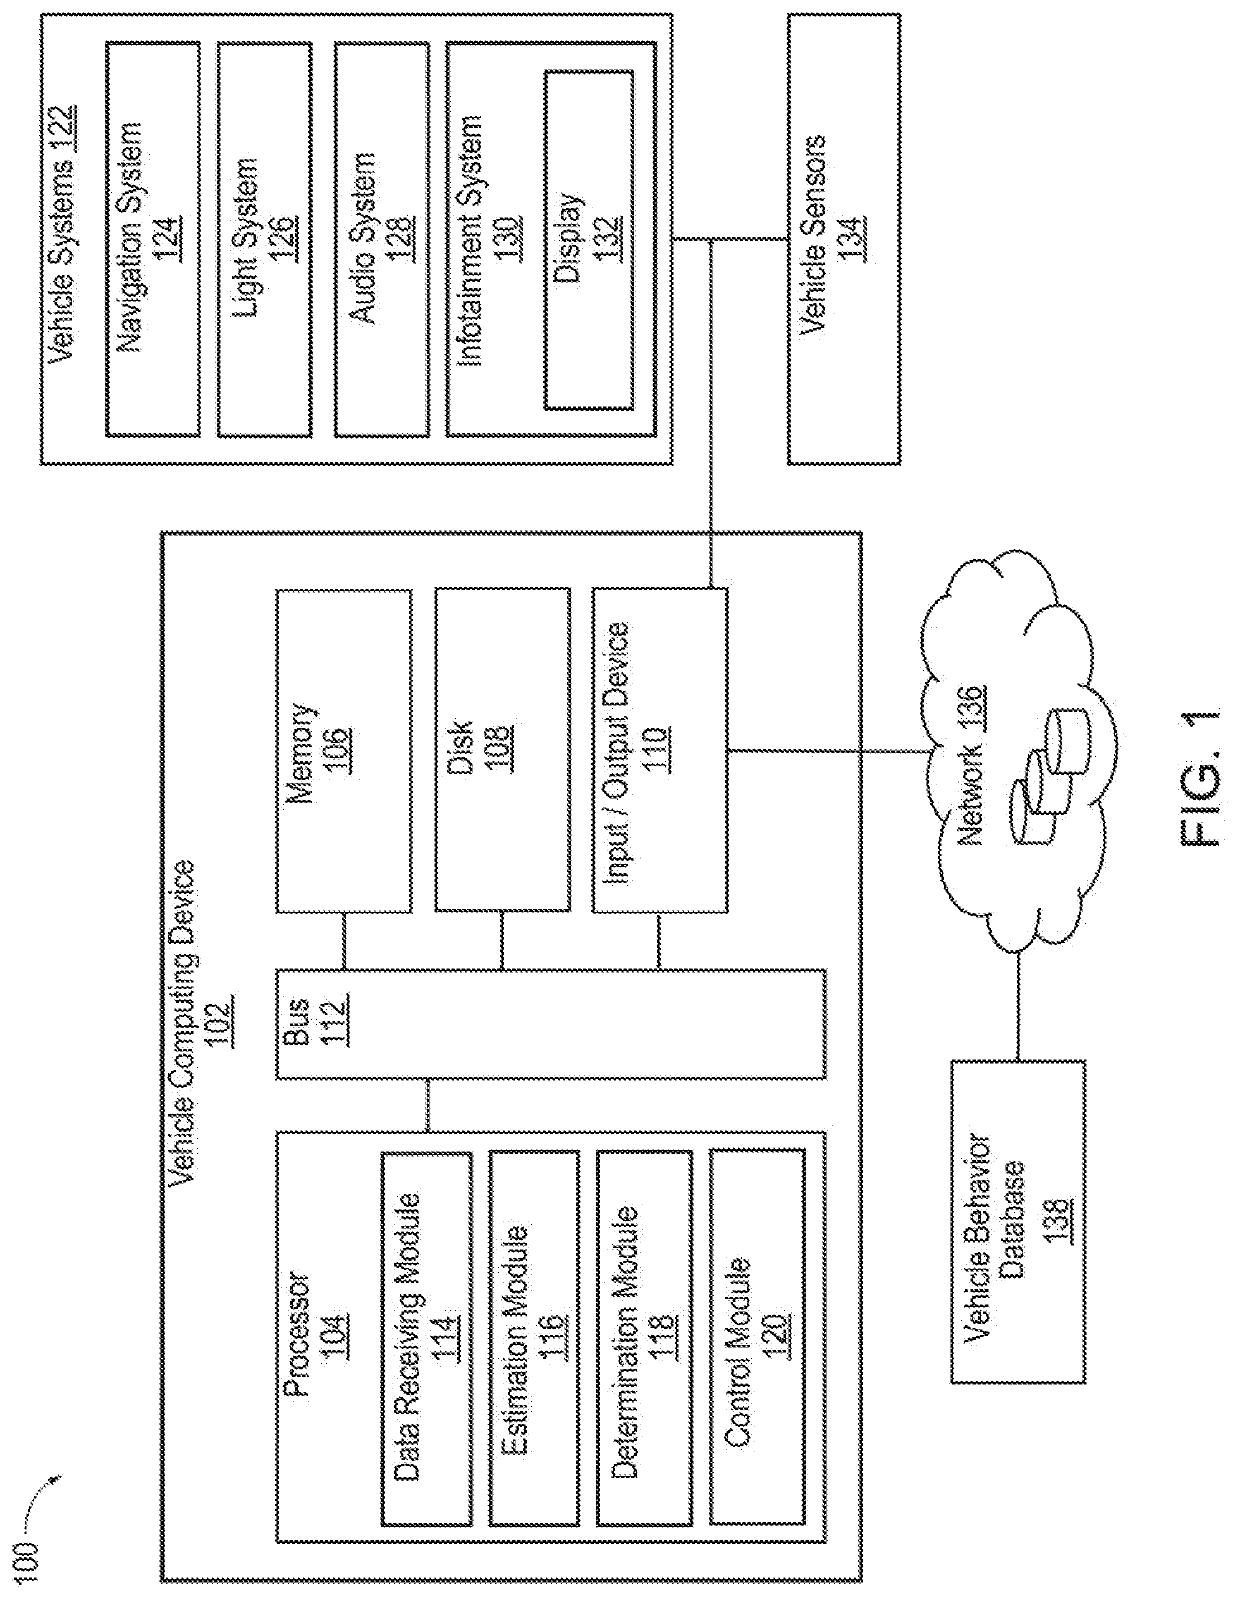 Systems and methods for distracted driving detection